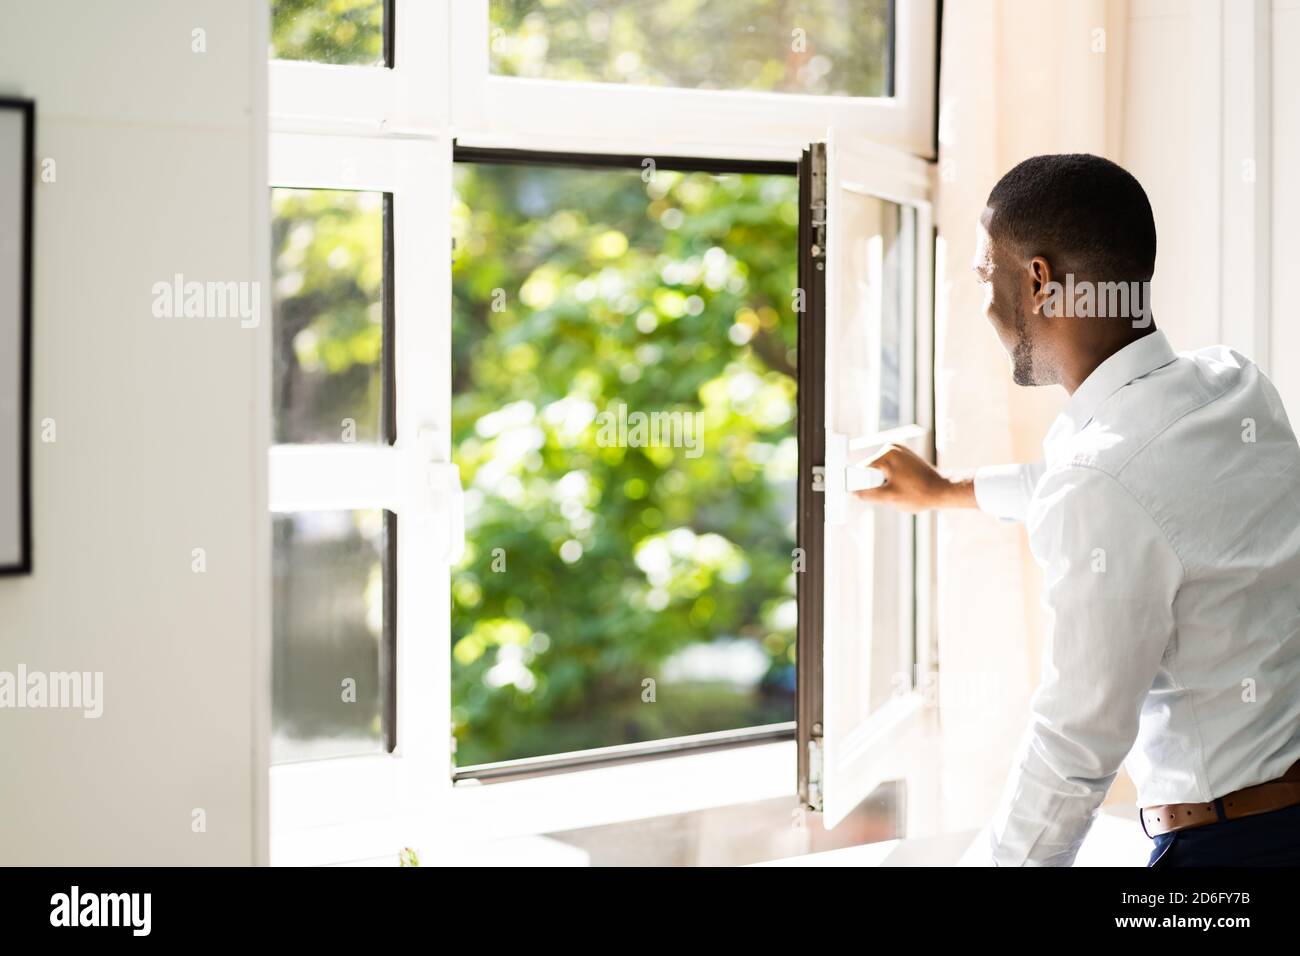 Fresh Air From Window. Side View Of Man Relaxing Stock Photo